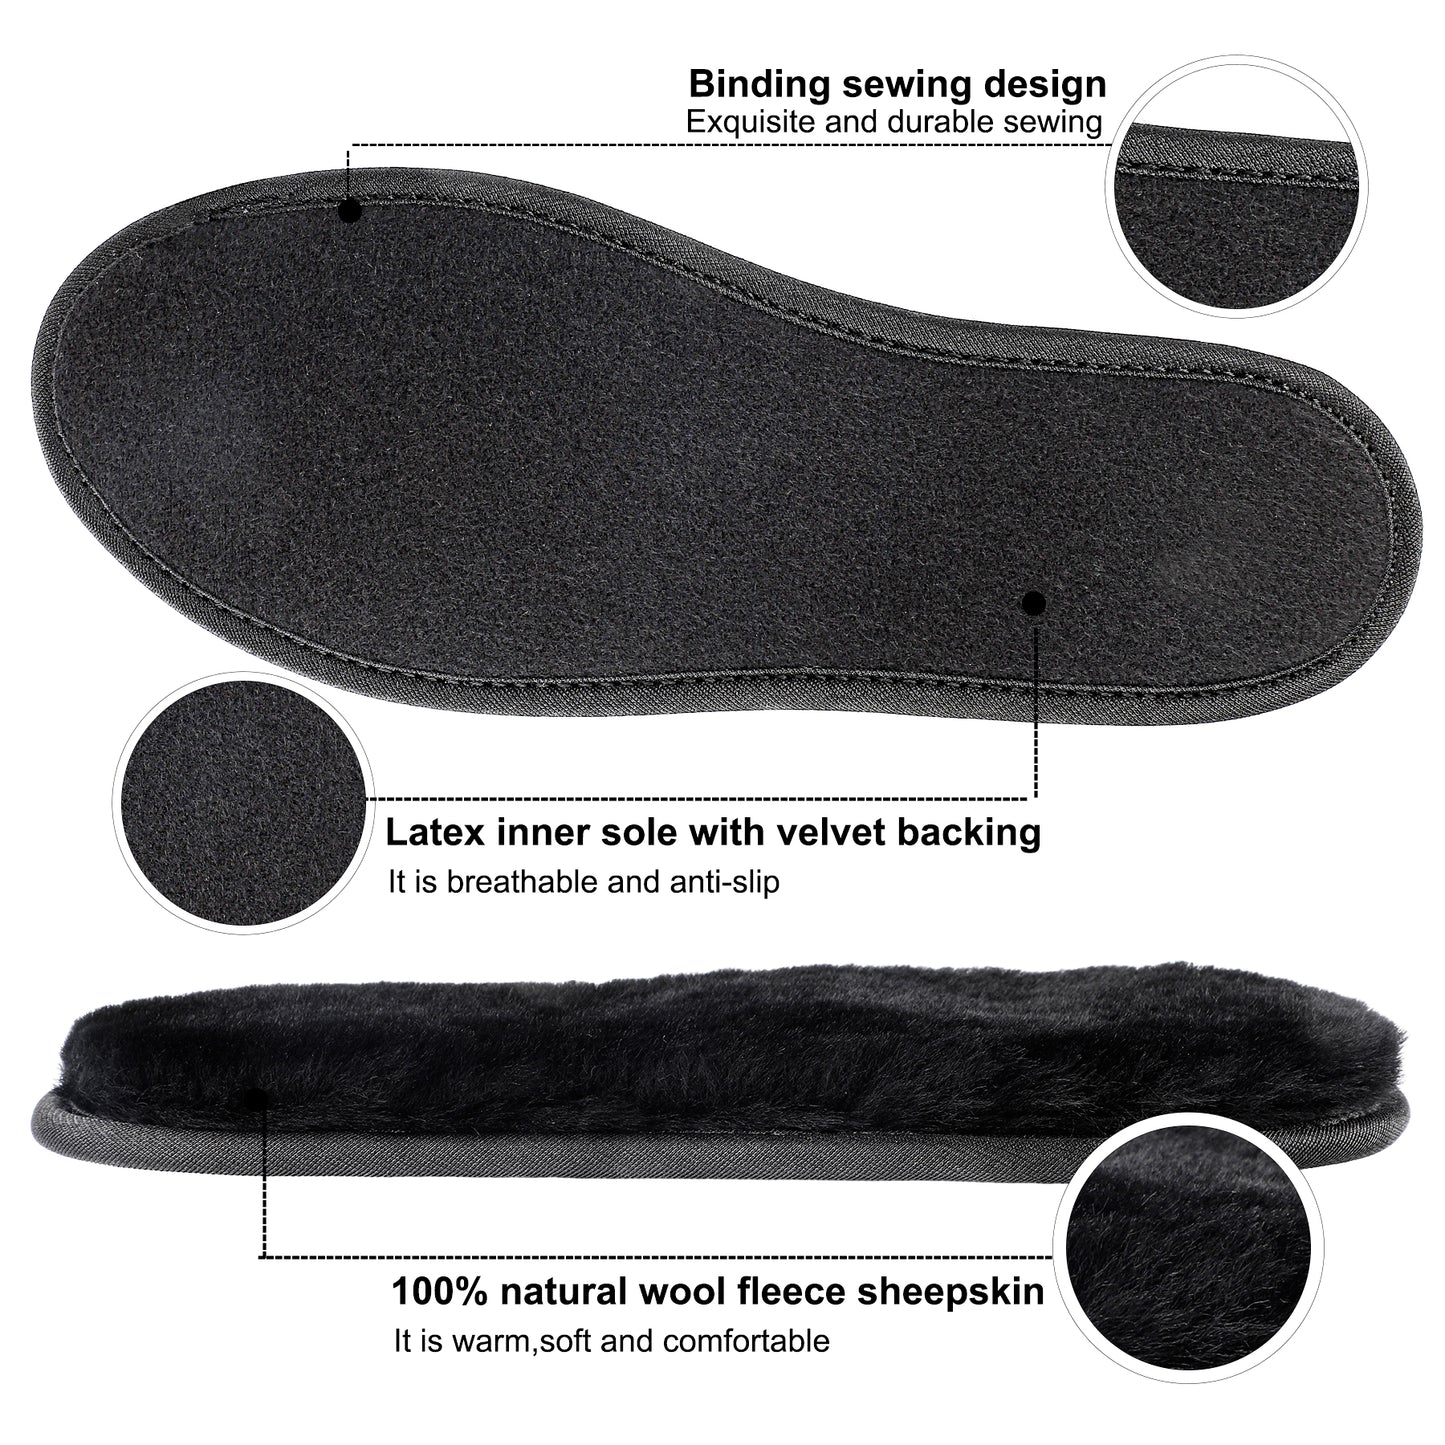 riemot Sheepskin Insoles for Men Women and Kids, Black Wide, Super Thick Premium Lambswool Insoles for Wellies Slippers Boots